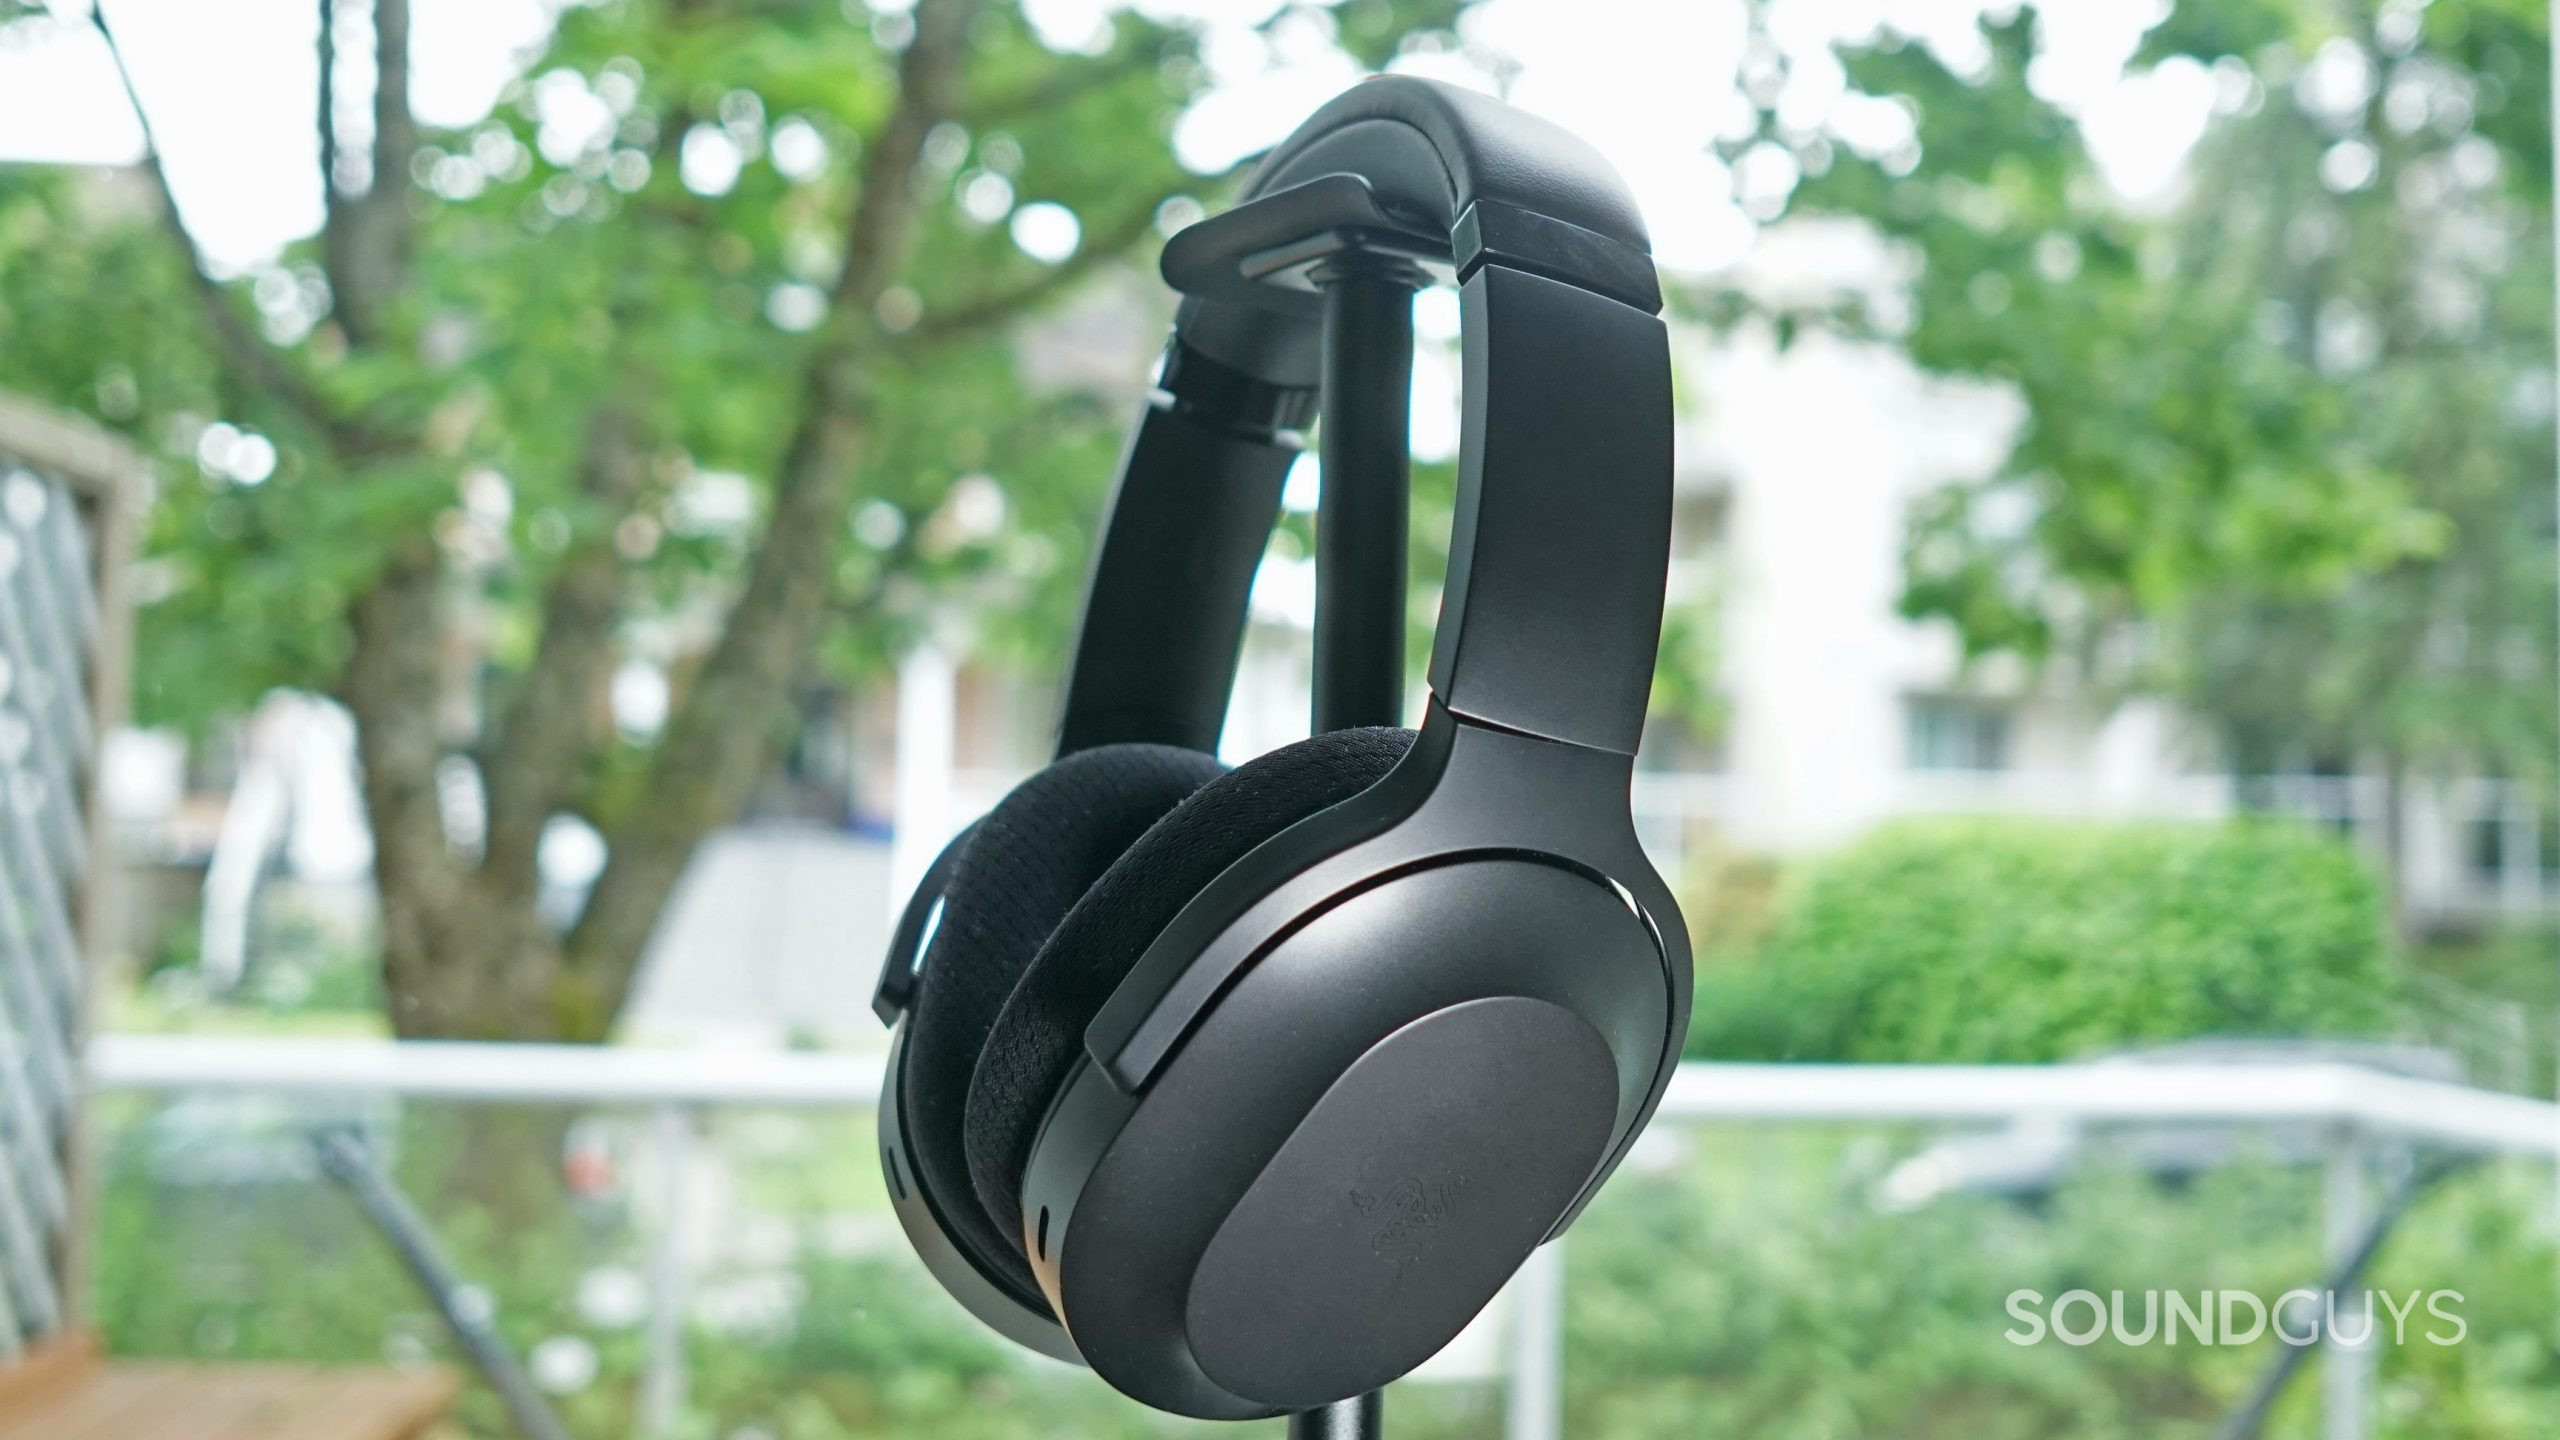 Razer Barracuda Pro review: A headset with an identity crisis